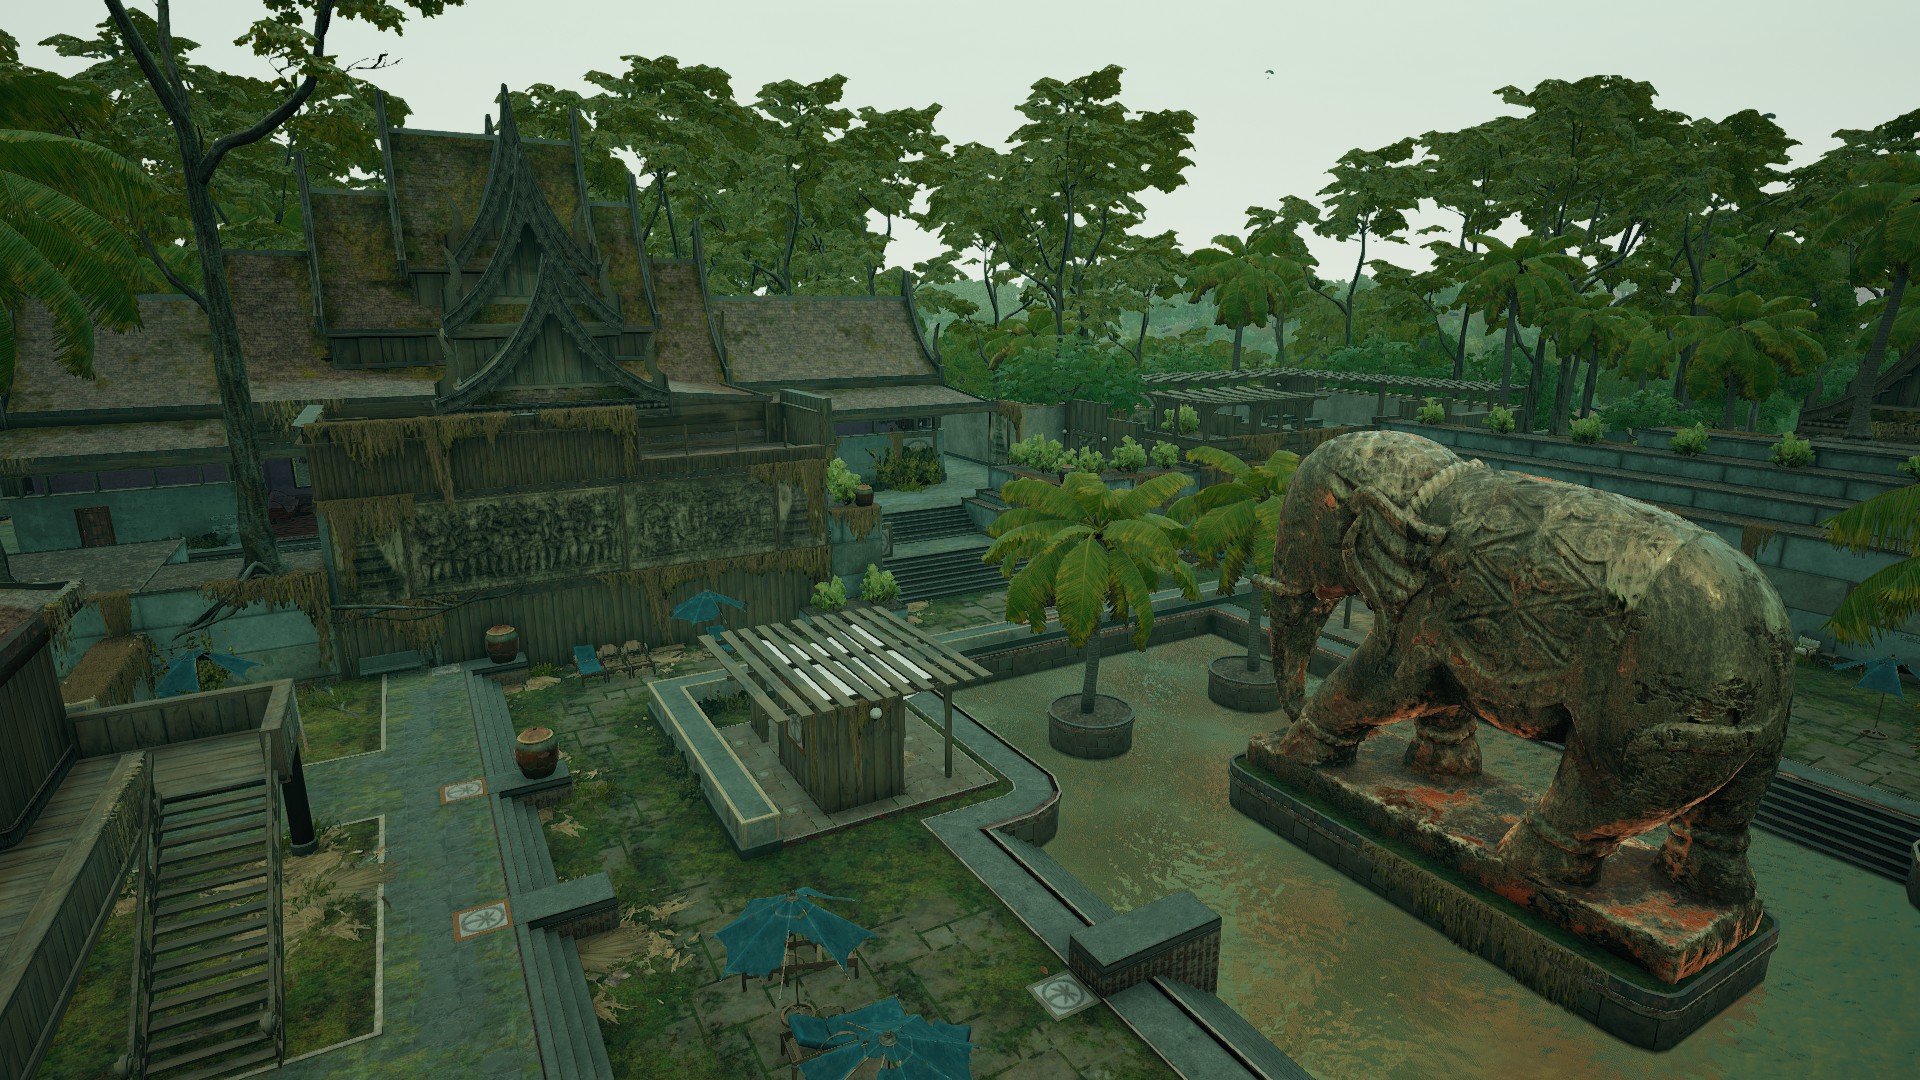 PUBG Sanhok drops: The courtyard of Sanhok's Paradise Resort, complete with a large elephant statue to the right.